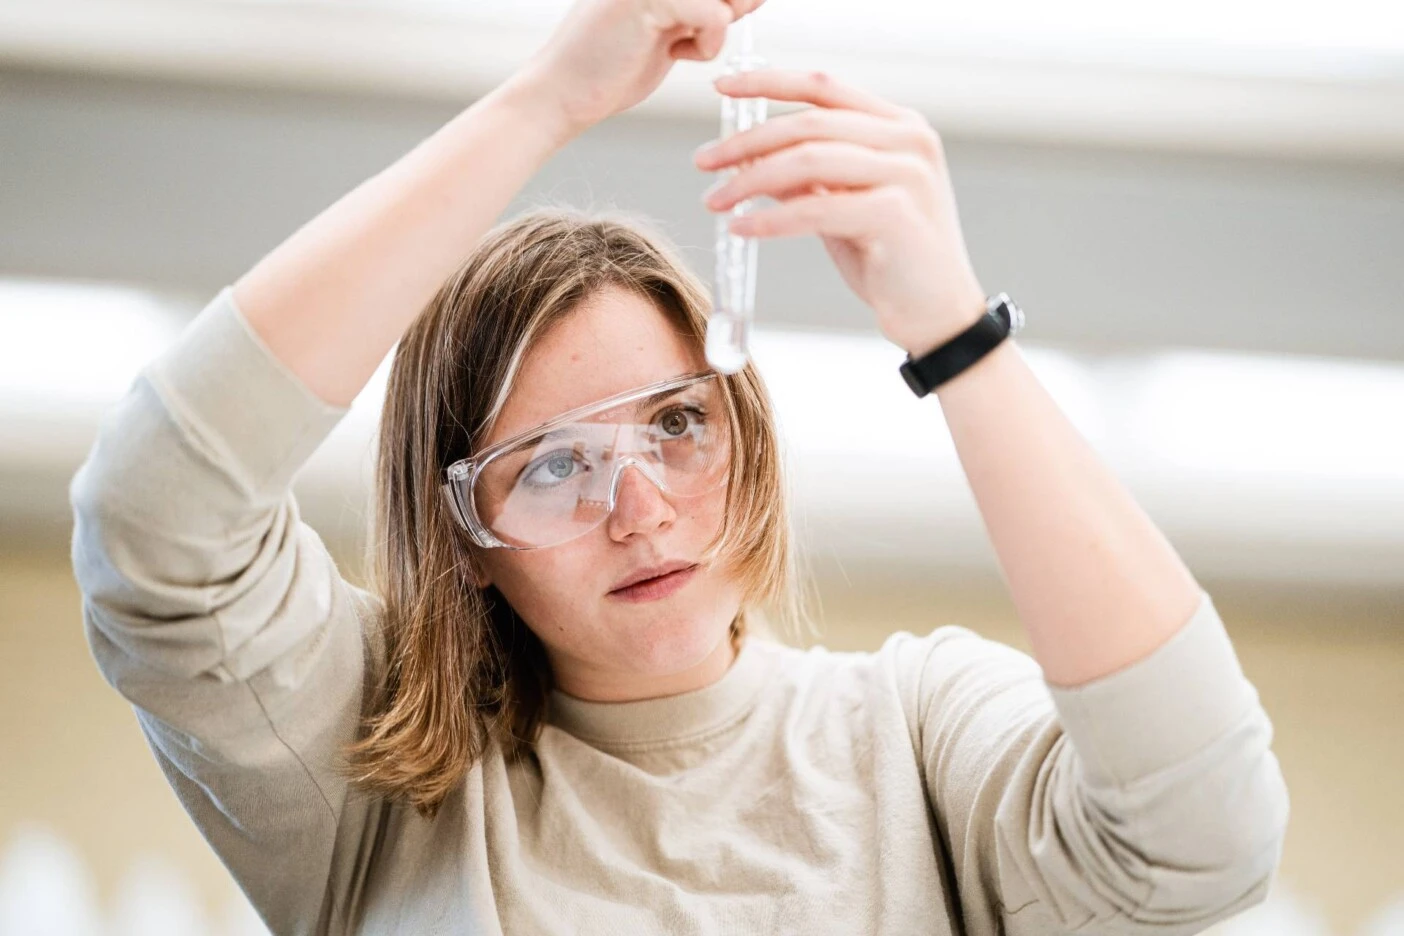 A student looking at a testing tube in the lab